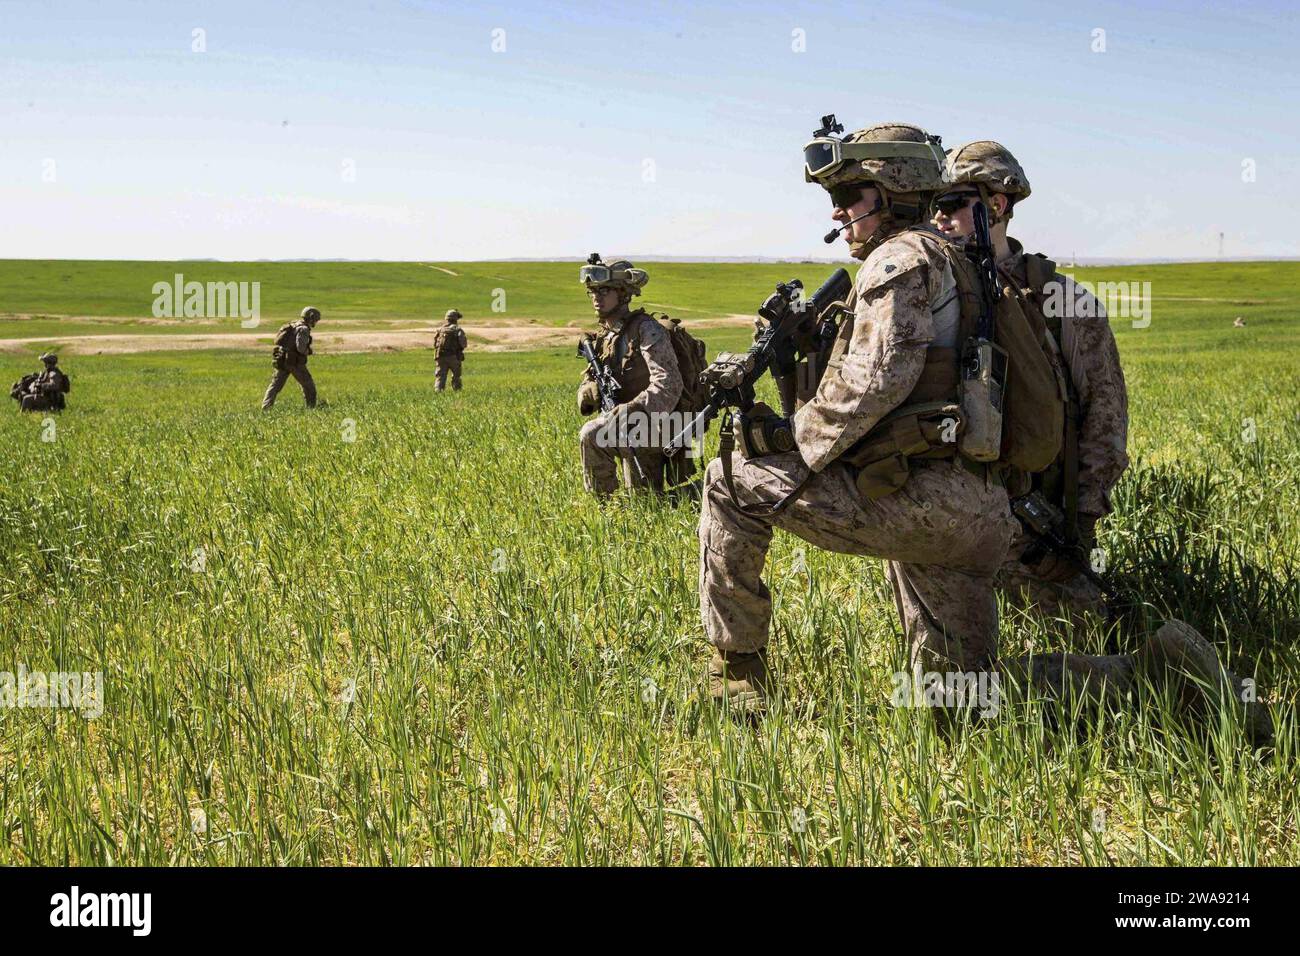 US military forces. 20180314-CA957-0042 HAIFA, Israel (March 14, 2018) U.S. Marines assigned to the Tactical Recovery of Aircraft Personnel (TRAP) team, 26th Marine Expeditionary Unit (MEU), pause to relay information during a simulated search mission in Haifa, Israel, during exercise Juniper Cobra 2018 March 14, 2018. Juniper Cobra is a computer-assisted exercise conducted through computer simulations focused on improving combined missile defense capabilities and overall interoperability between the U.S. European Command and Israel Defense Force. (U.S. Marine Corps photo by Lance Cpl. Tojyea Stock Photo